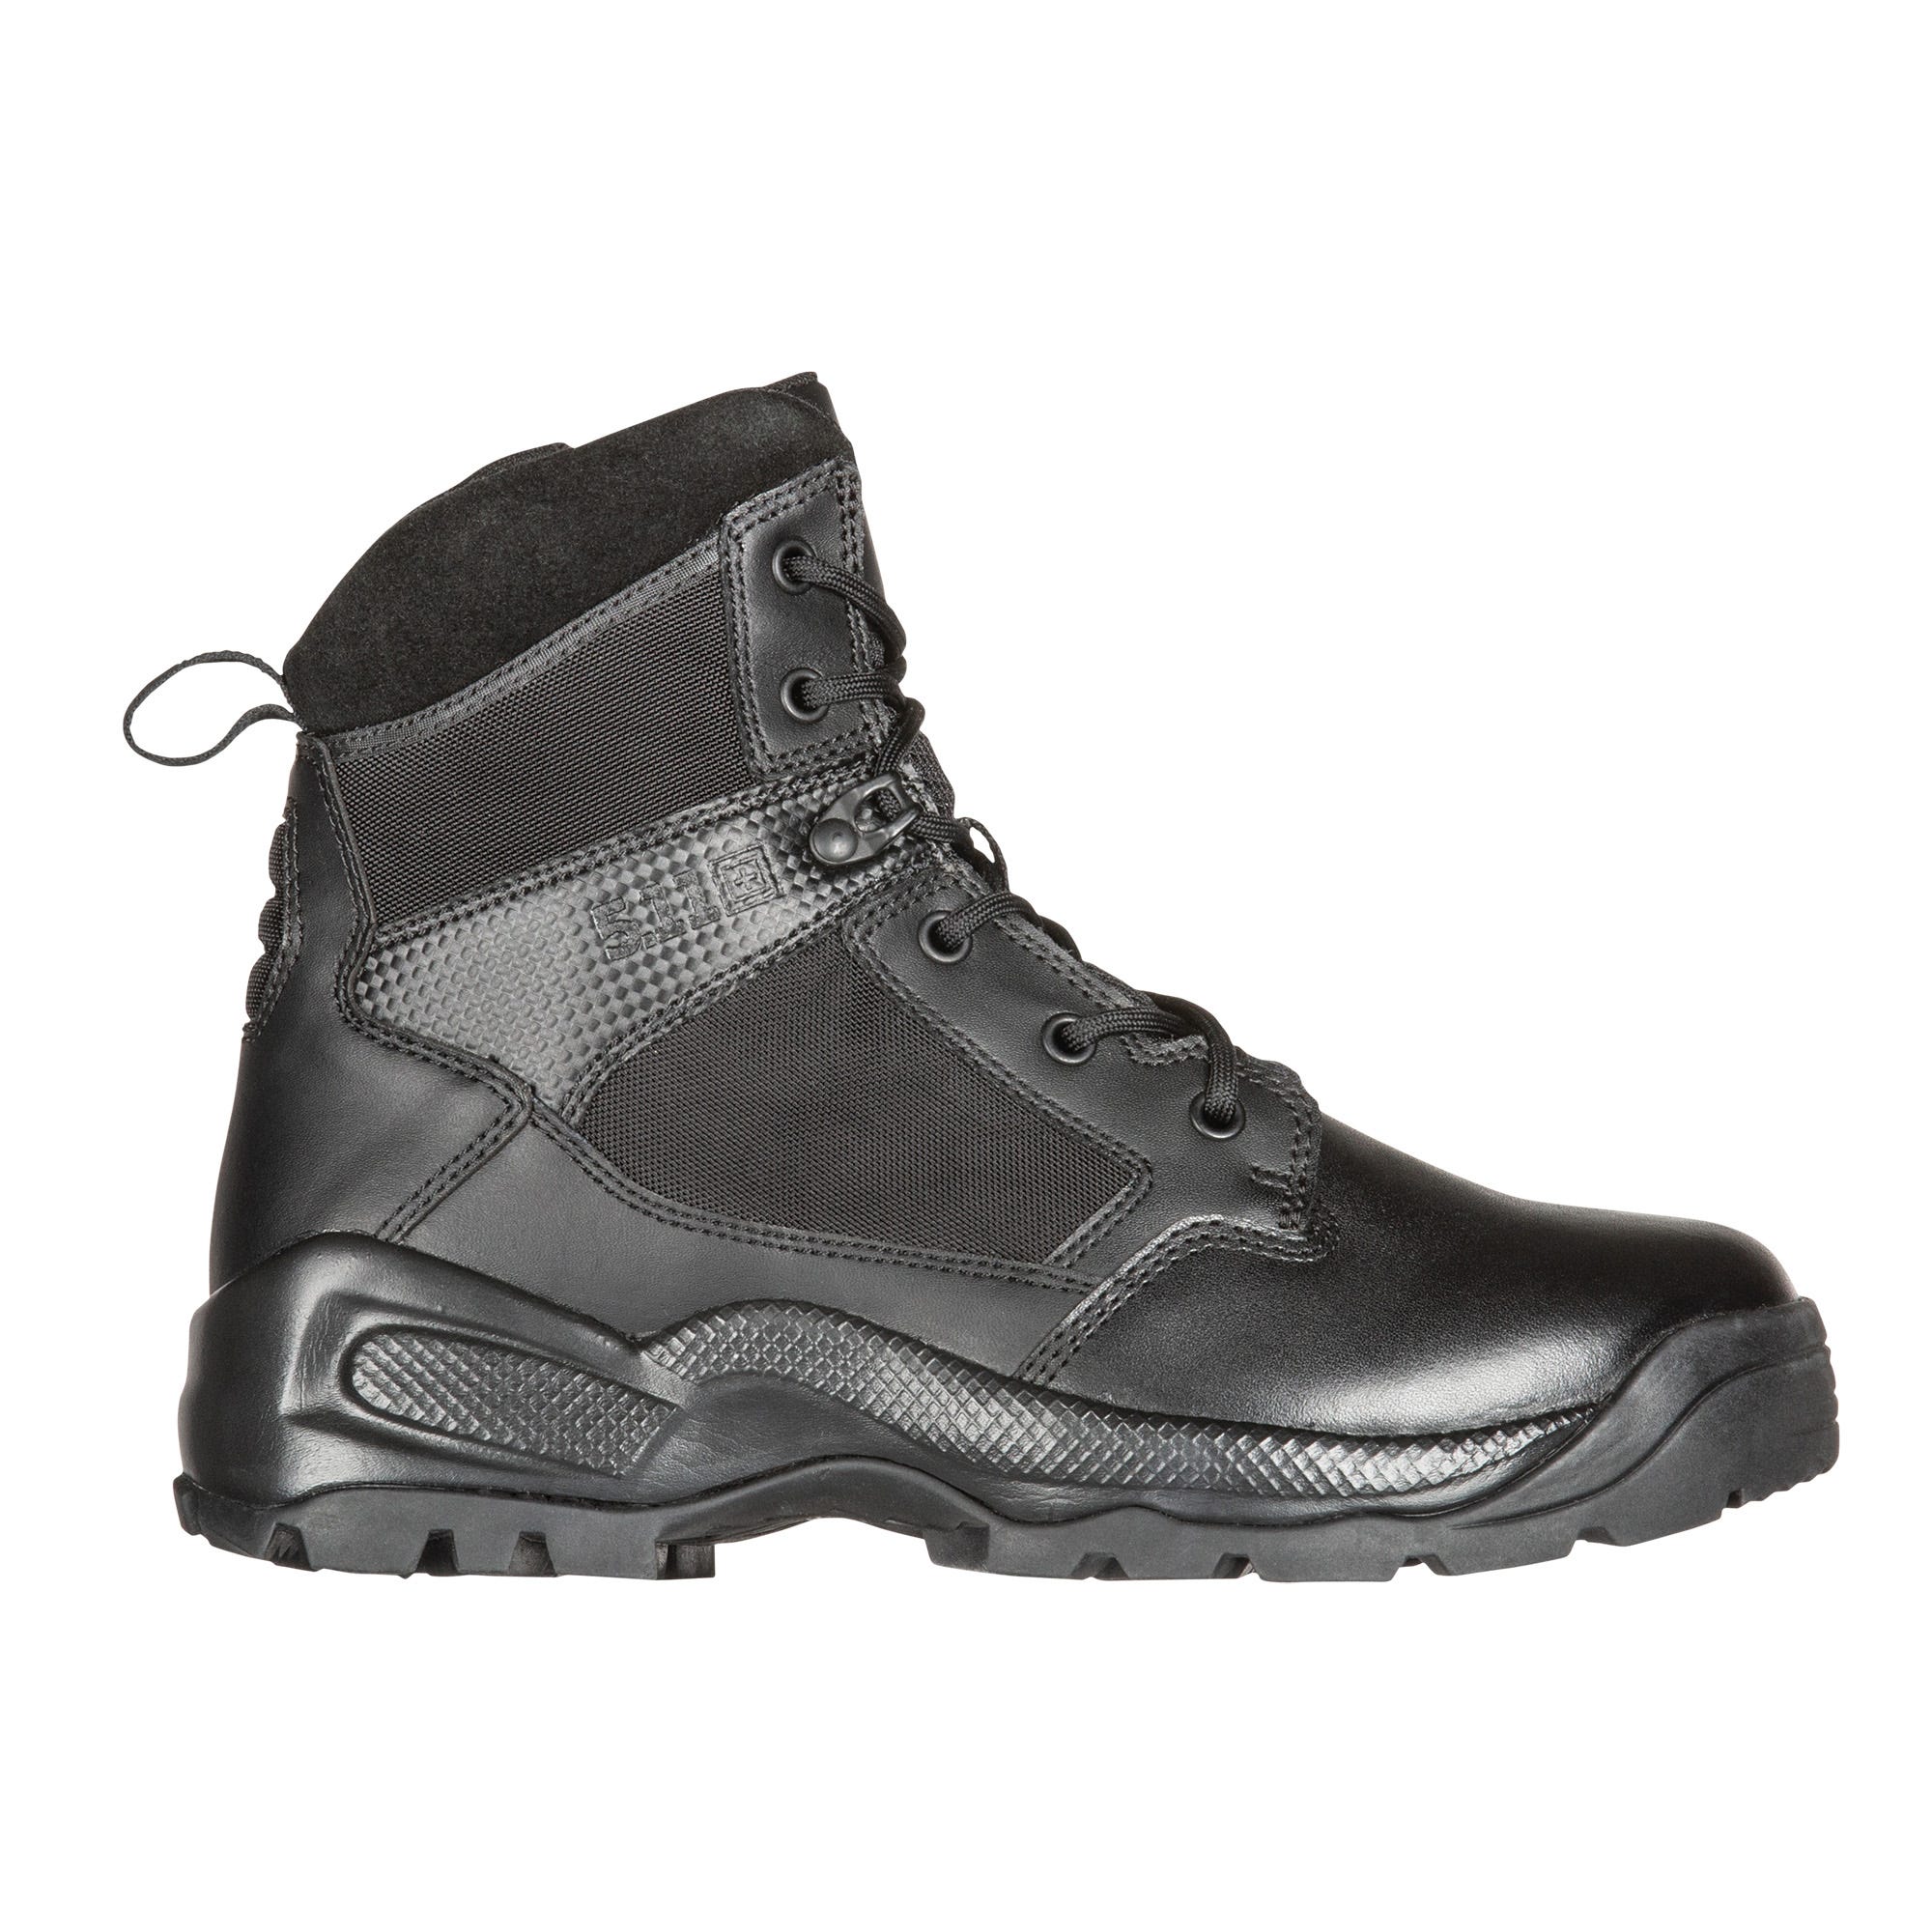 Slip Resistant Outsole Style 12004 5.11 Tactical Mens ATAC 1.0 Waterproof Military Storm Boots 